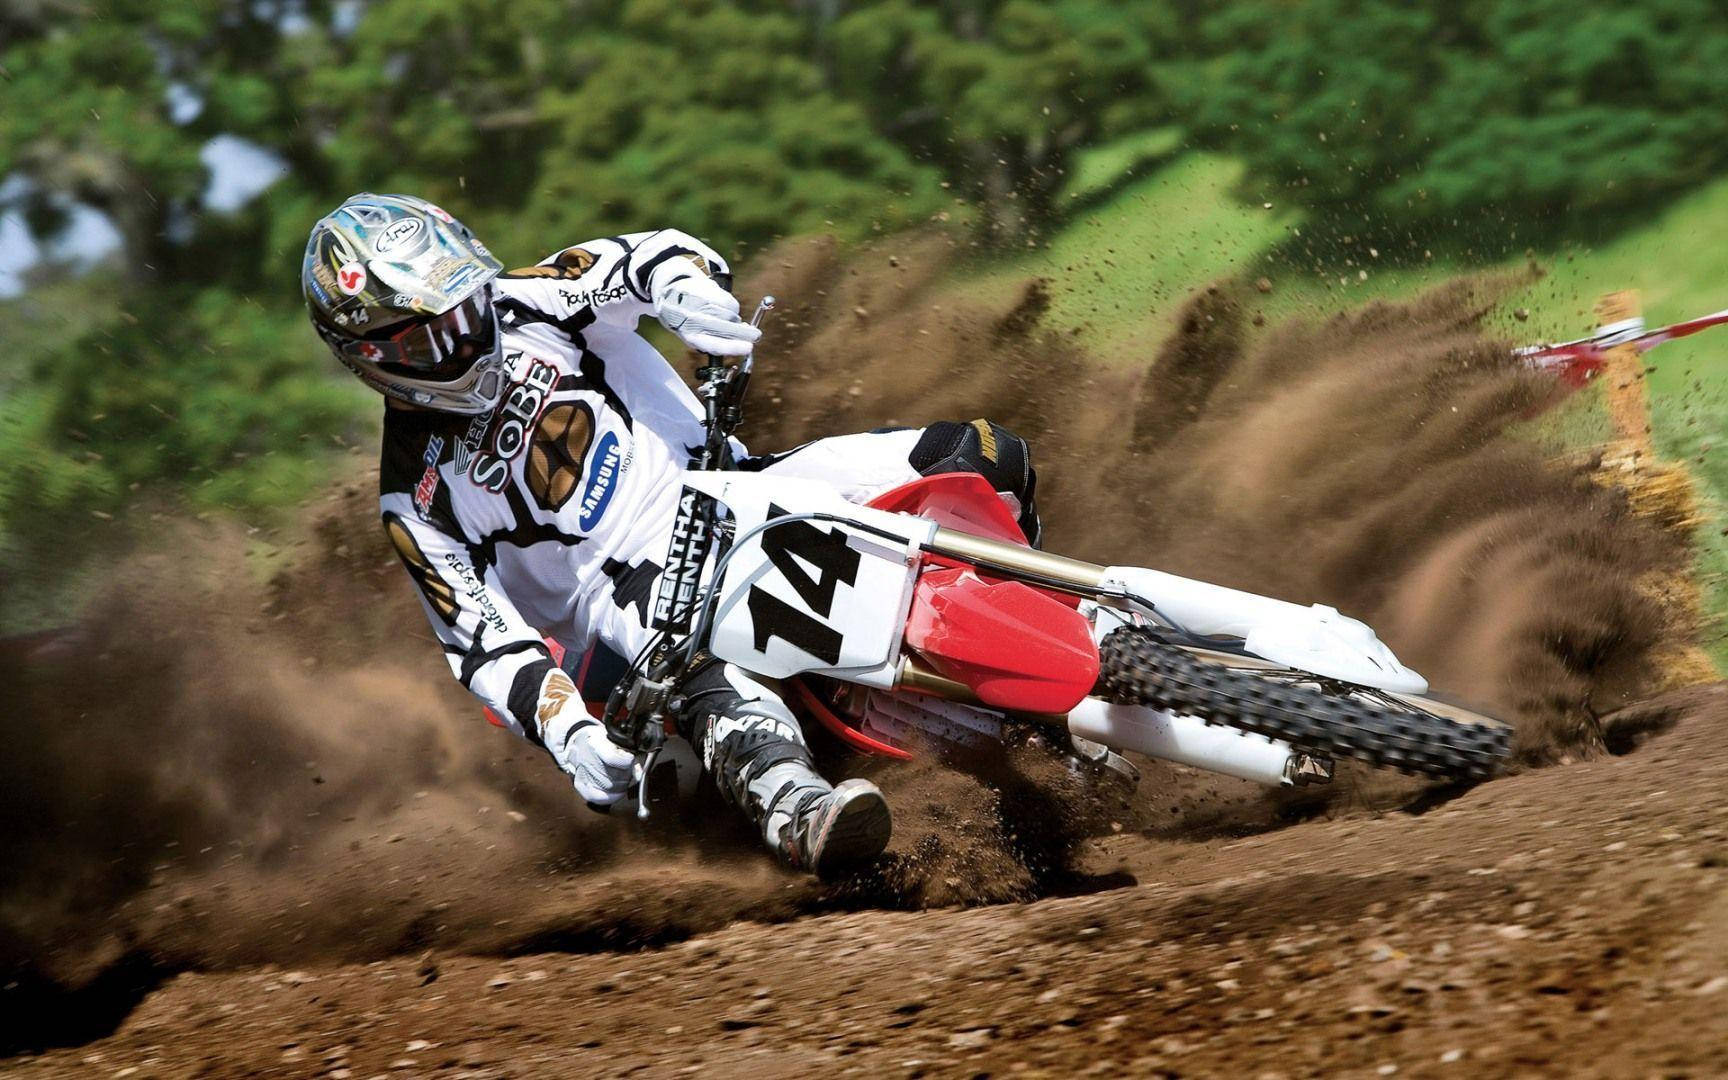 Dirt Bike 1728X1080 Wallpaper and Background Image